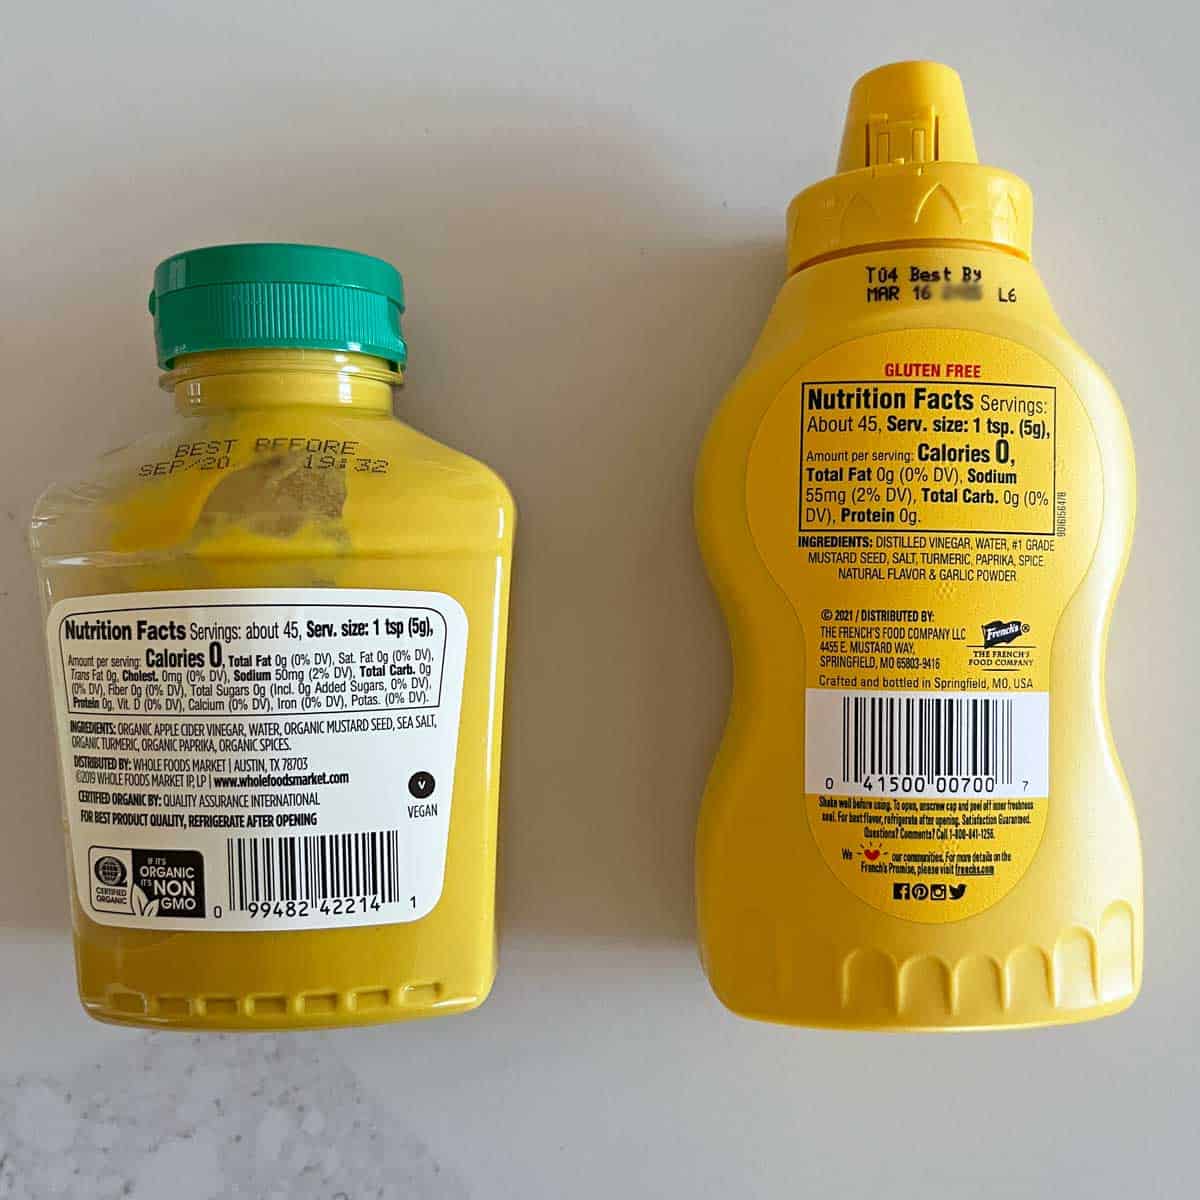 French's yellow mustard ingredients compared to a store brand yellow mustard ingredients.